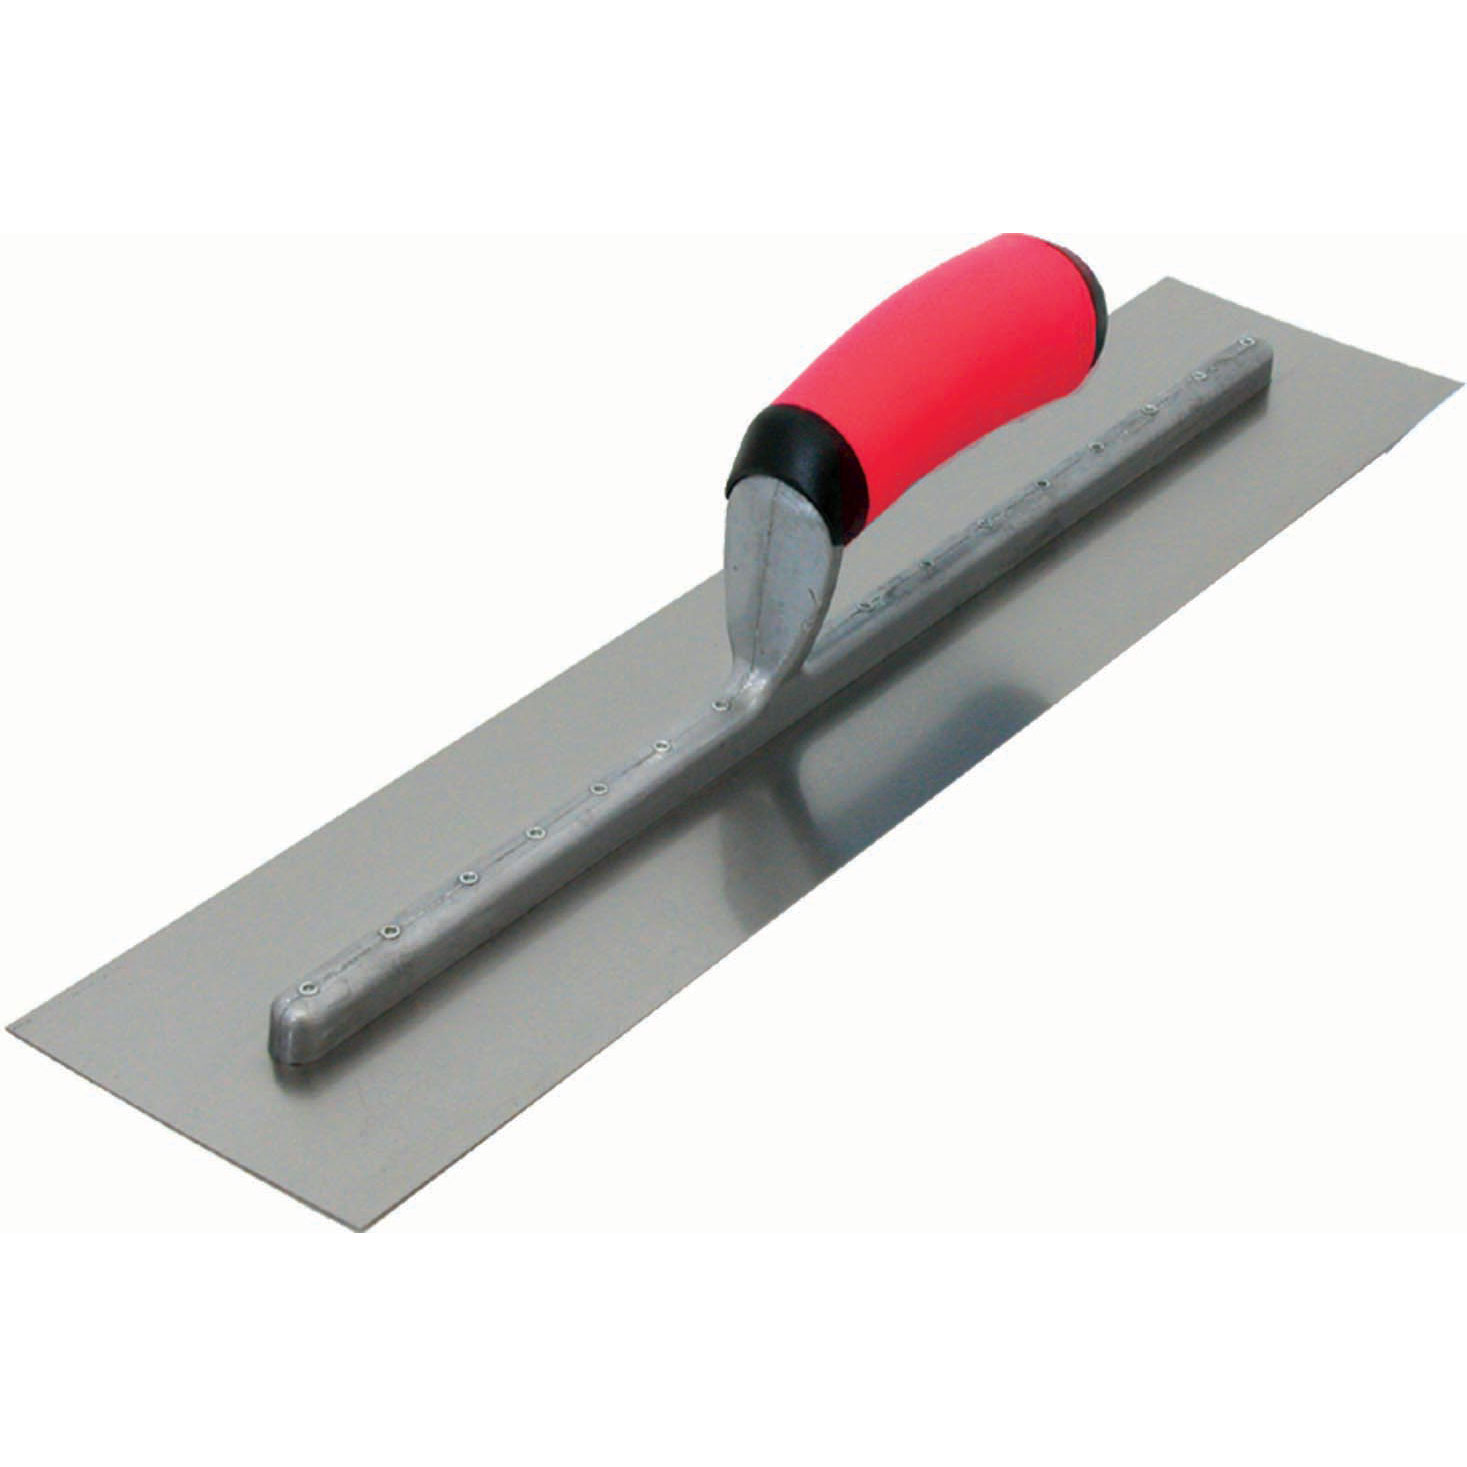 Marshalltown FT376R 20in x 4in Finishing Trowel with Curved Resilient Hdle FT376R